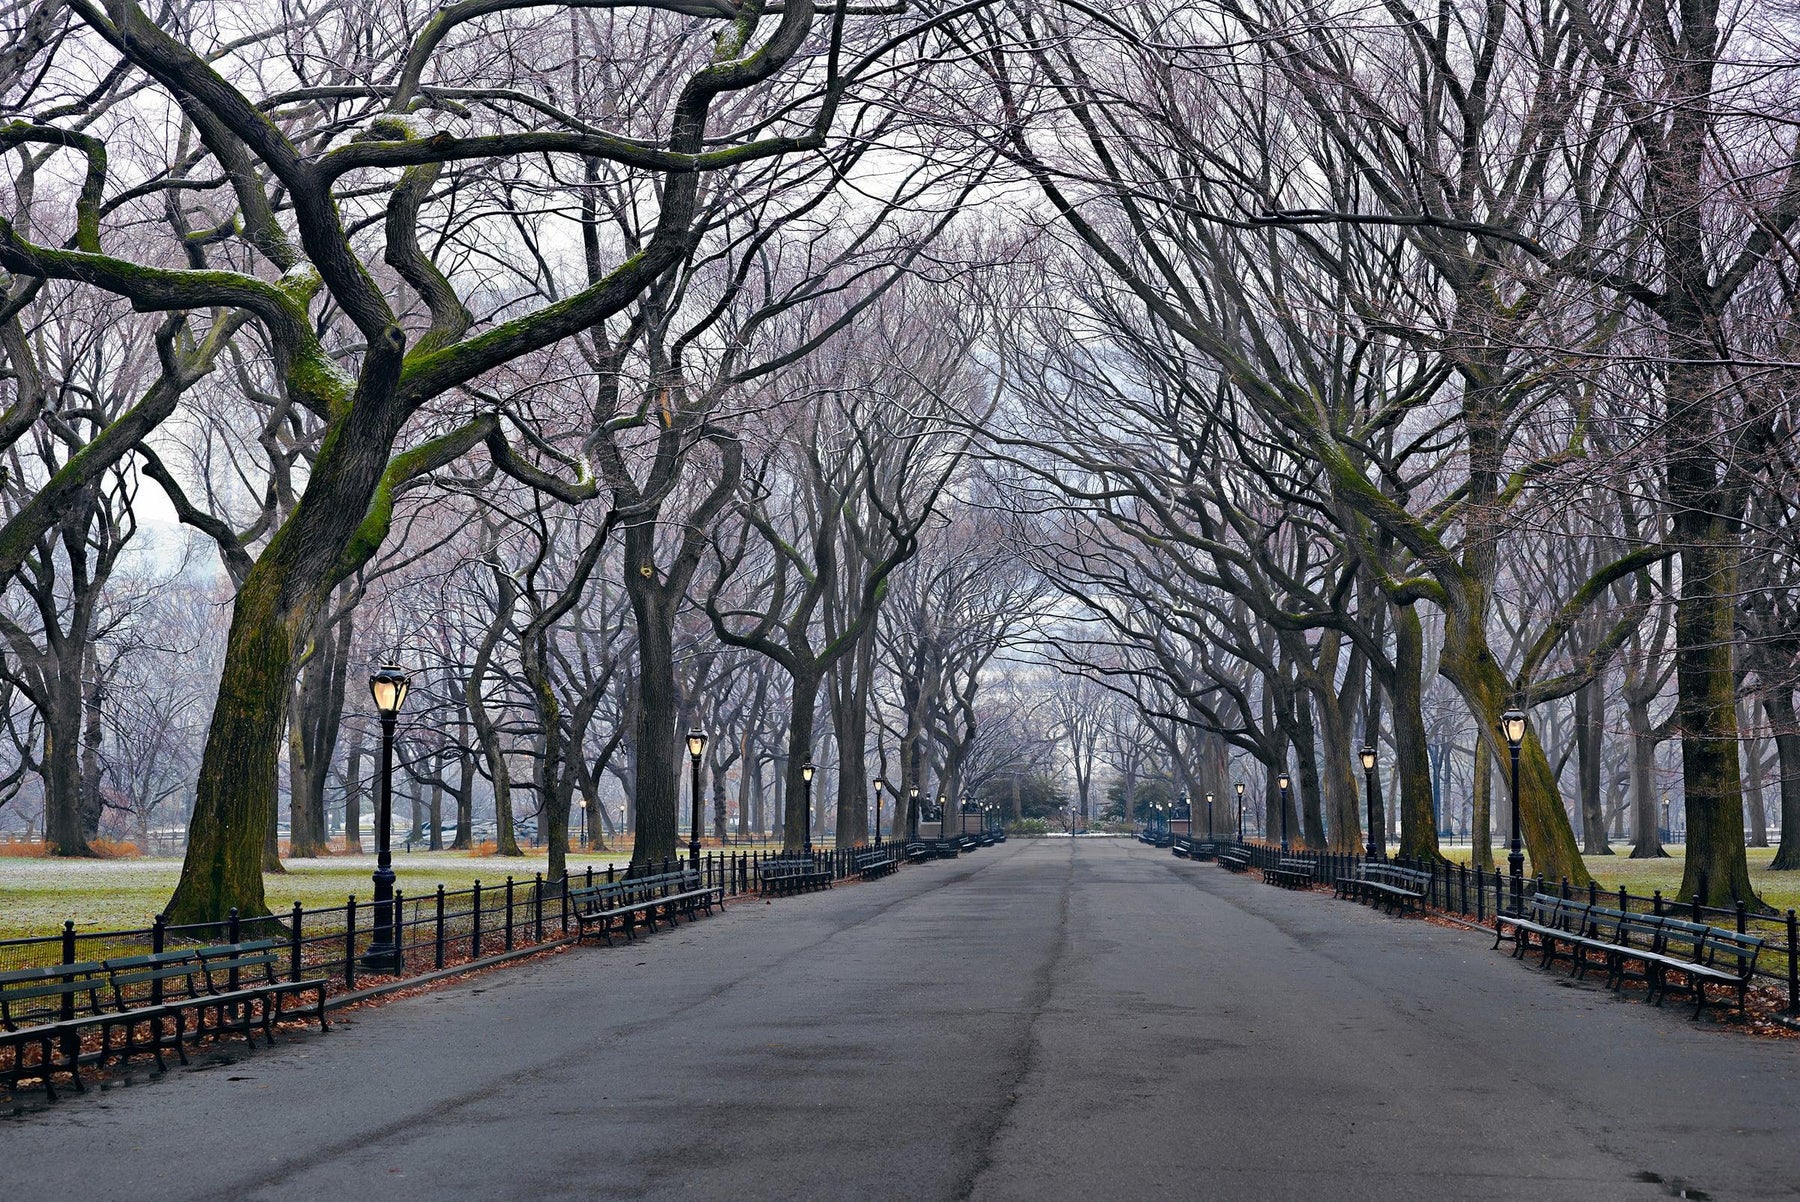 Bench lined path leading through the leafless trees in Central Park New York